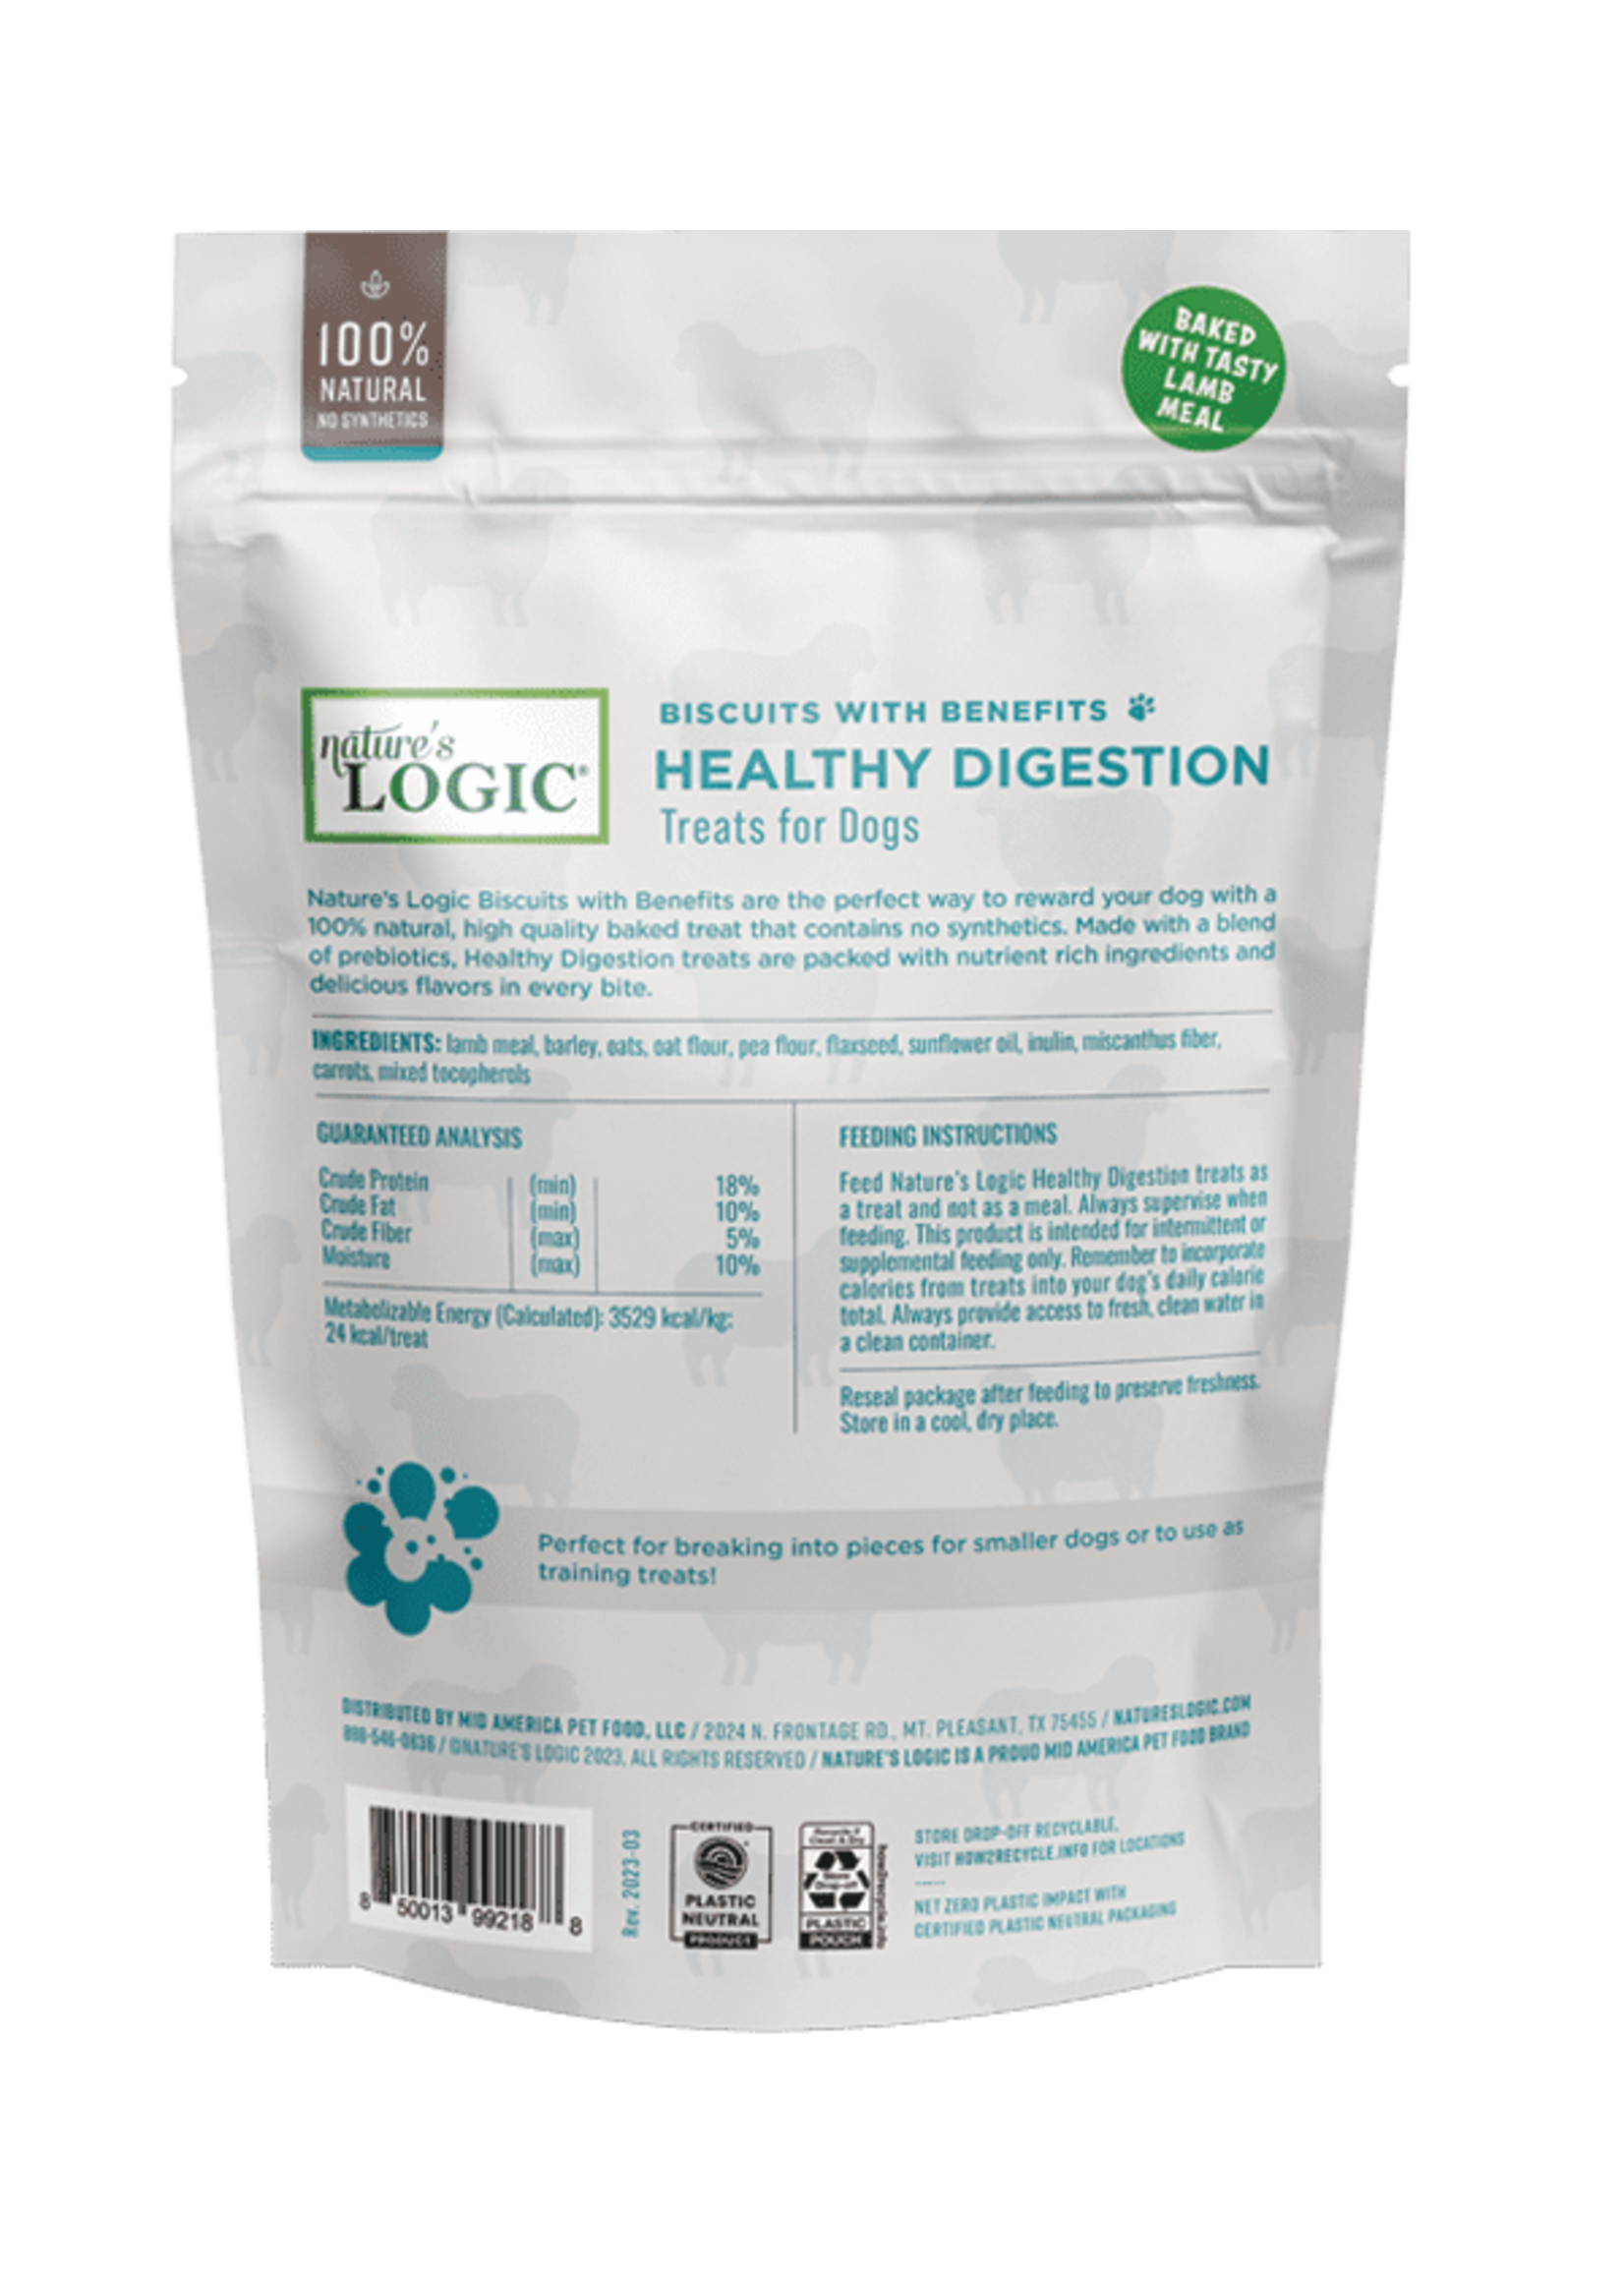 Nature's Logic Healthy Digestion Treats for Dogs 12 oz